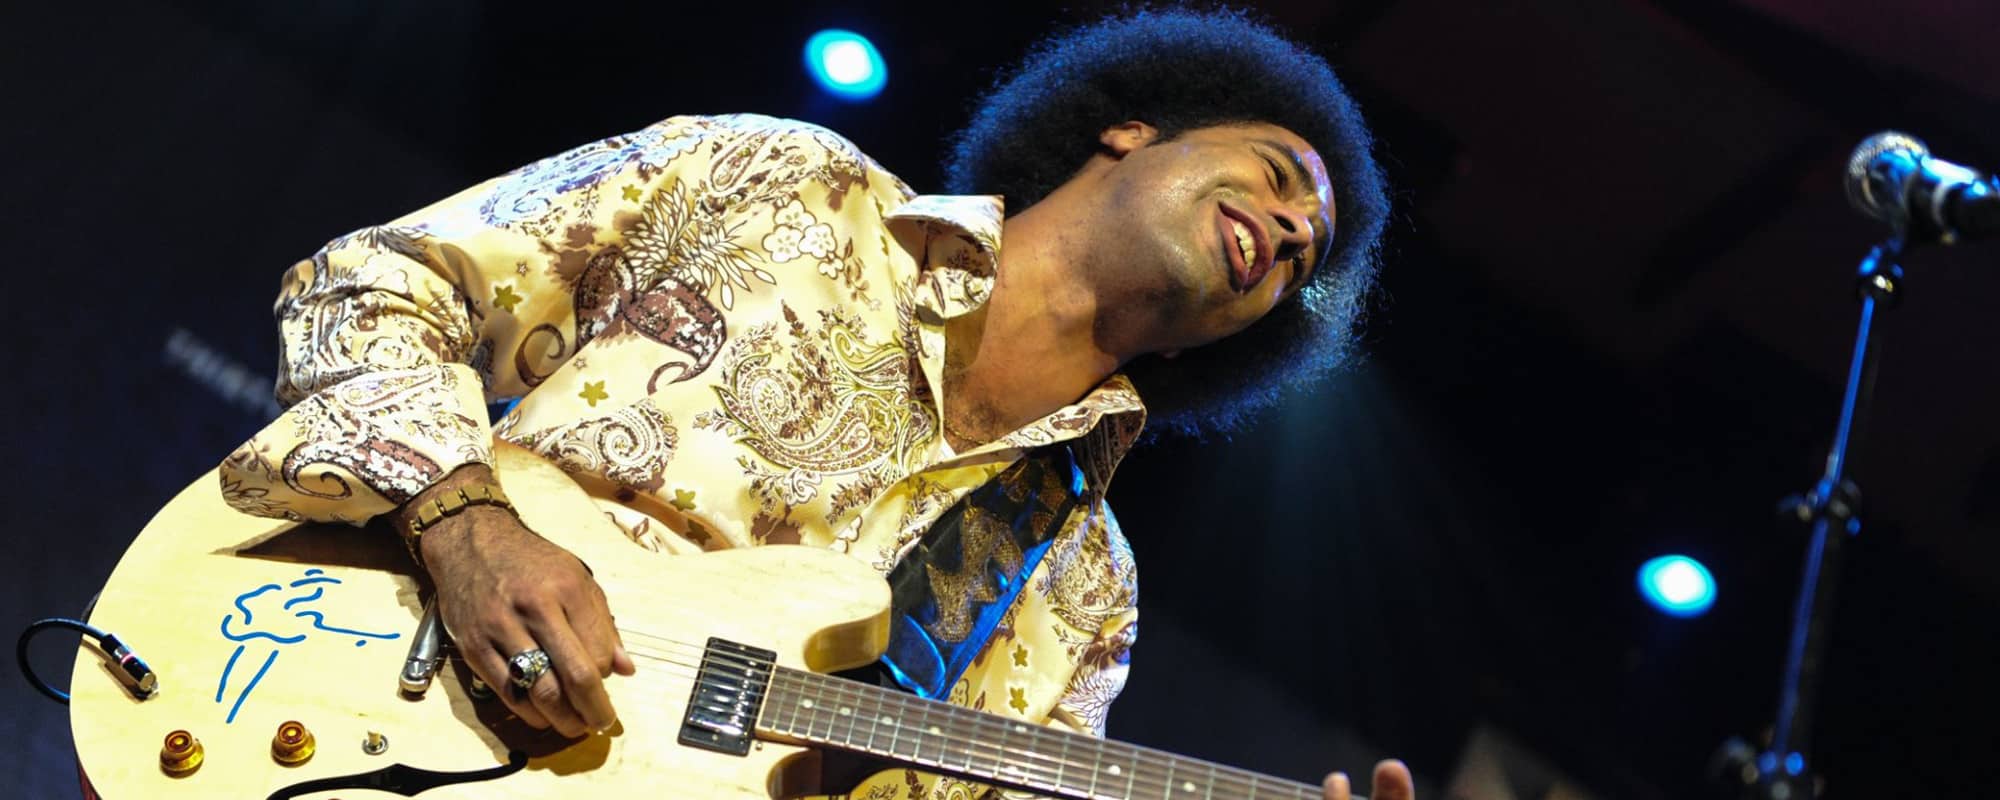 Selwyn Birchwood Finds His Sound on New Album ‘Living In A Burning House’